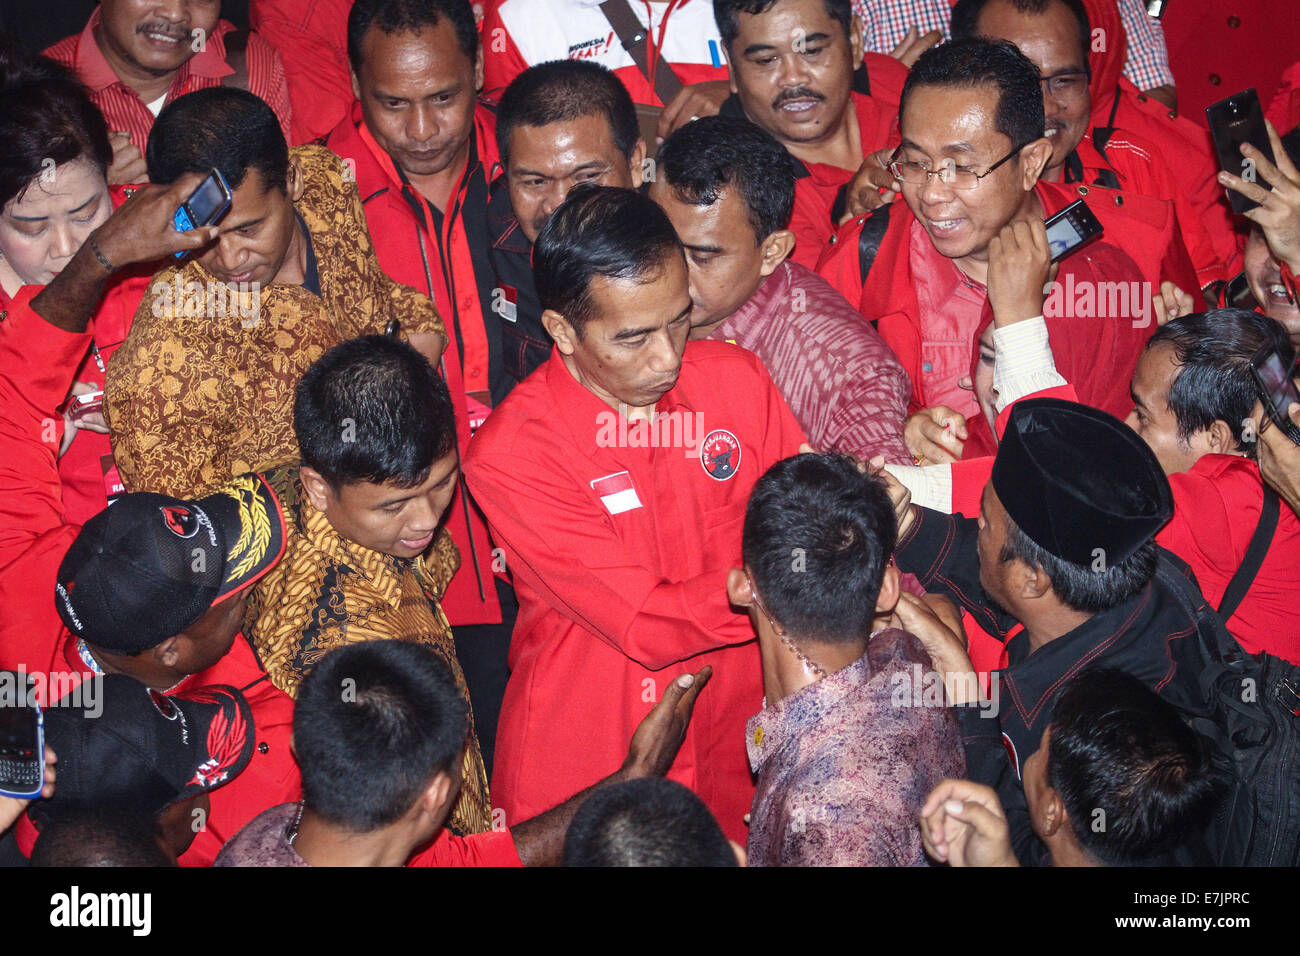 Semarang, Indonesia. 19th September, 2014. Indonesian president-elect Joko Widodo shakes hands with supporters during the 4th national working meeting of PDI-P at Marina Convention Hall in Semarang, Central Java, Indonesia. The national meeting attended by 1,590 party cadres from all over Indonesia and take place from 19-21 September 2014. The meeting is expected to change the 10-year mindset of the PDI-P, as it has switched to being the ruling party from being the opposition party. Credit:  PACIFIC PRESS/Alamy Live News Stock Photo